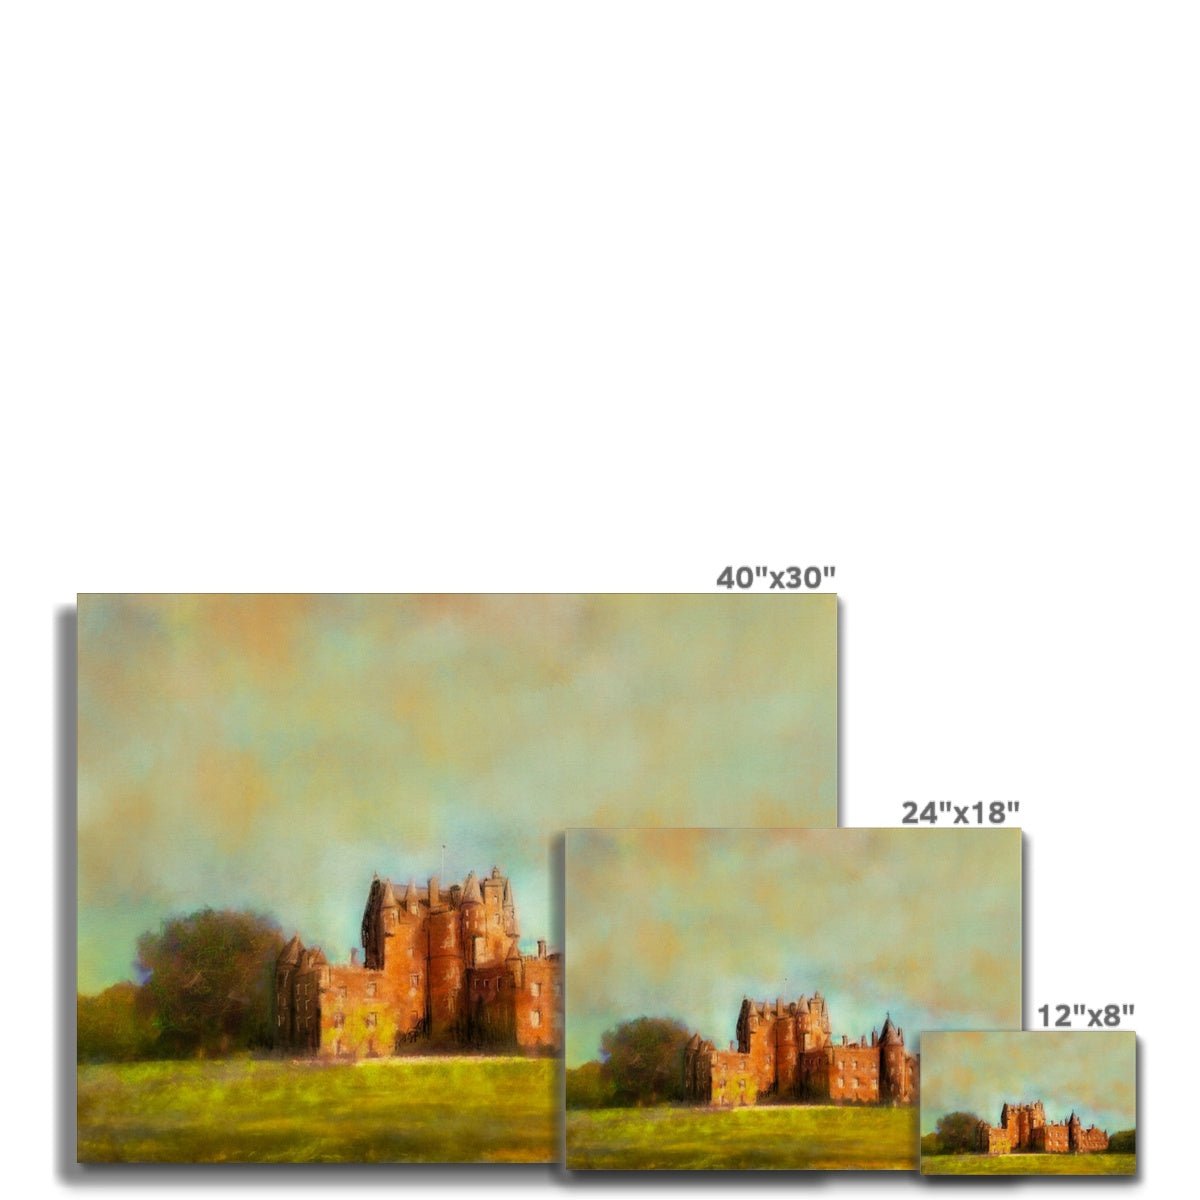 Glamis Castle Painting | Canvas From Scotland-Contemporary Stretched Canvas Prints-Scottish Castles Art Gallery-Paintings, Prints, Homeware, Art Gifts From Scotland By Scottish Artist Kevin Hunter